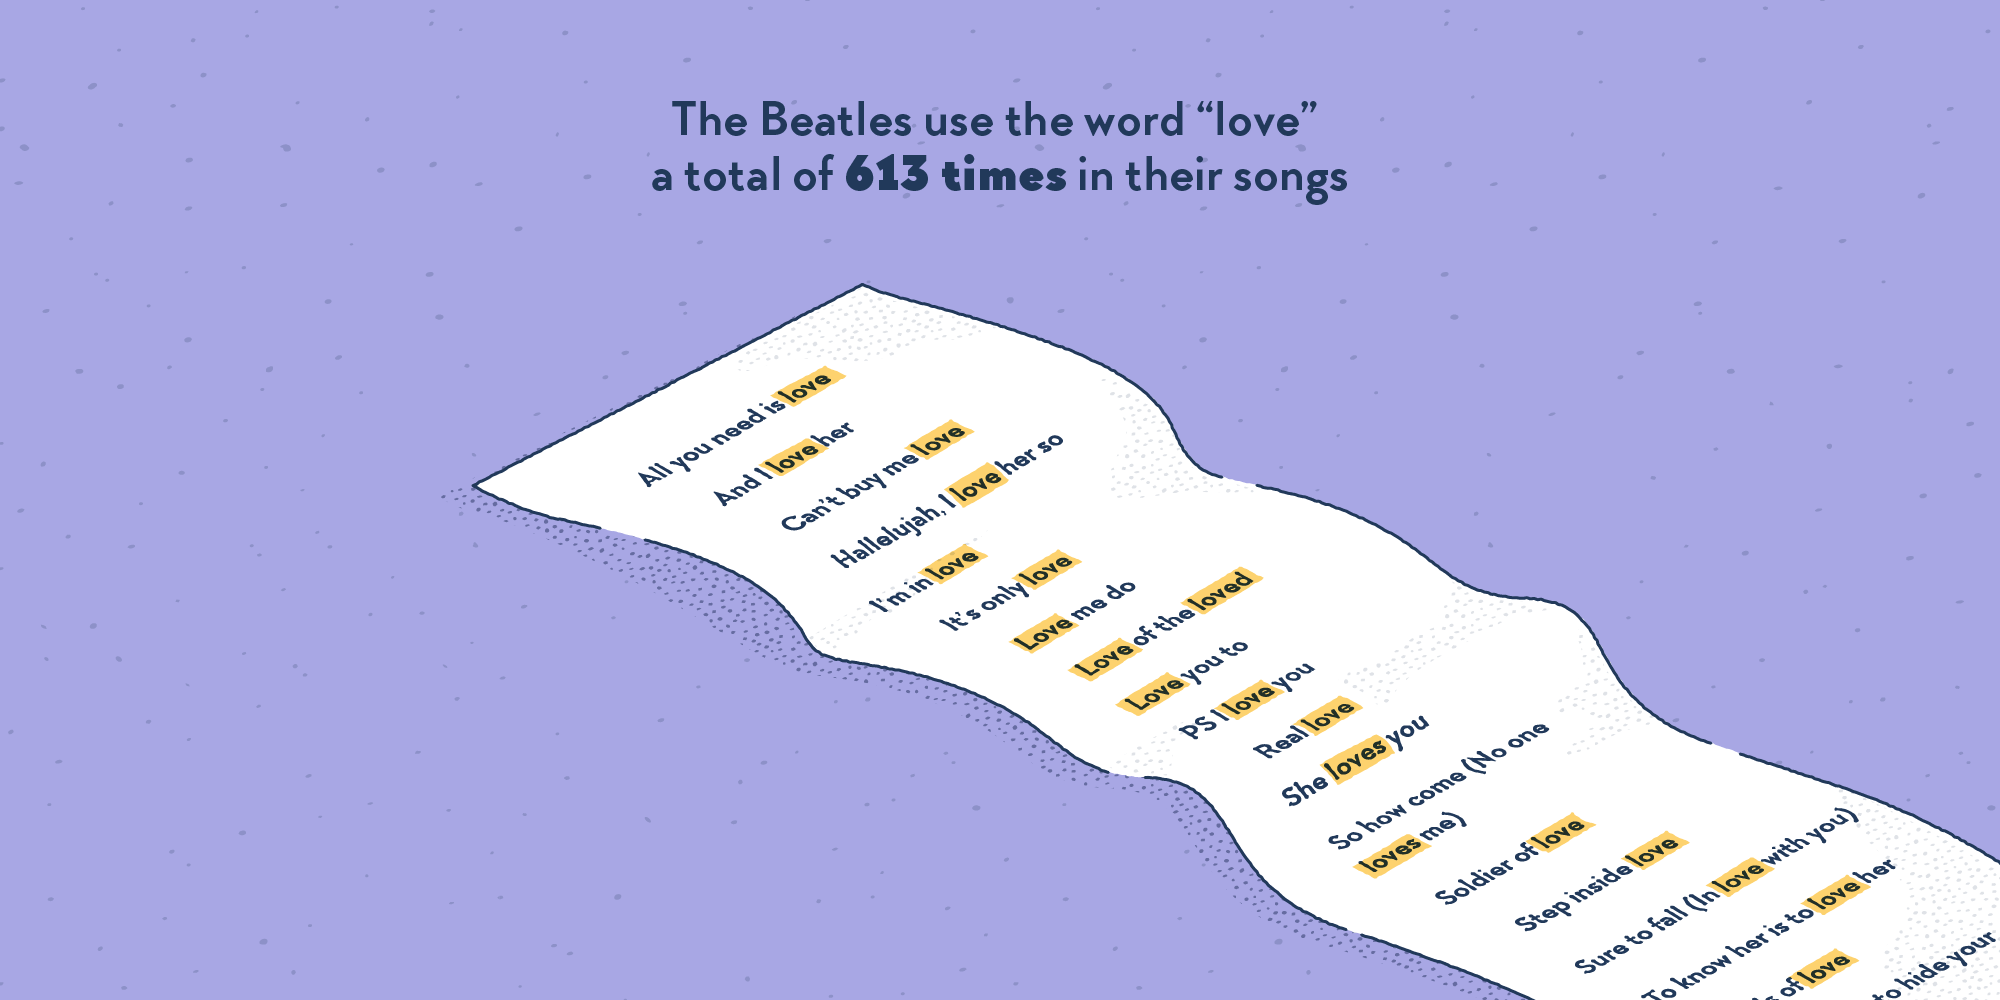 A long list of verses from the Beatles: “All you need is love”, “And I love her”, “Can't buy me love”, etc. The word “love” is highlighted each time it appears.